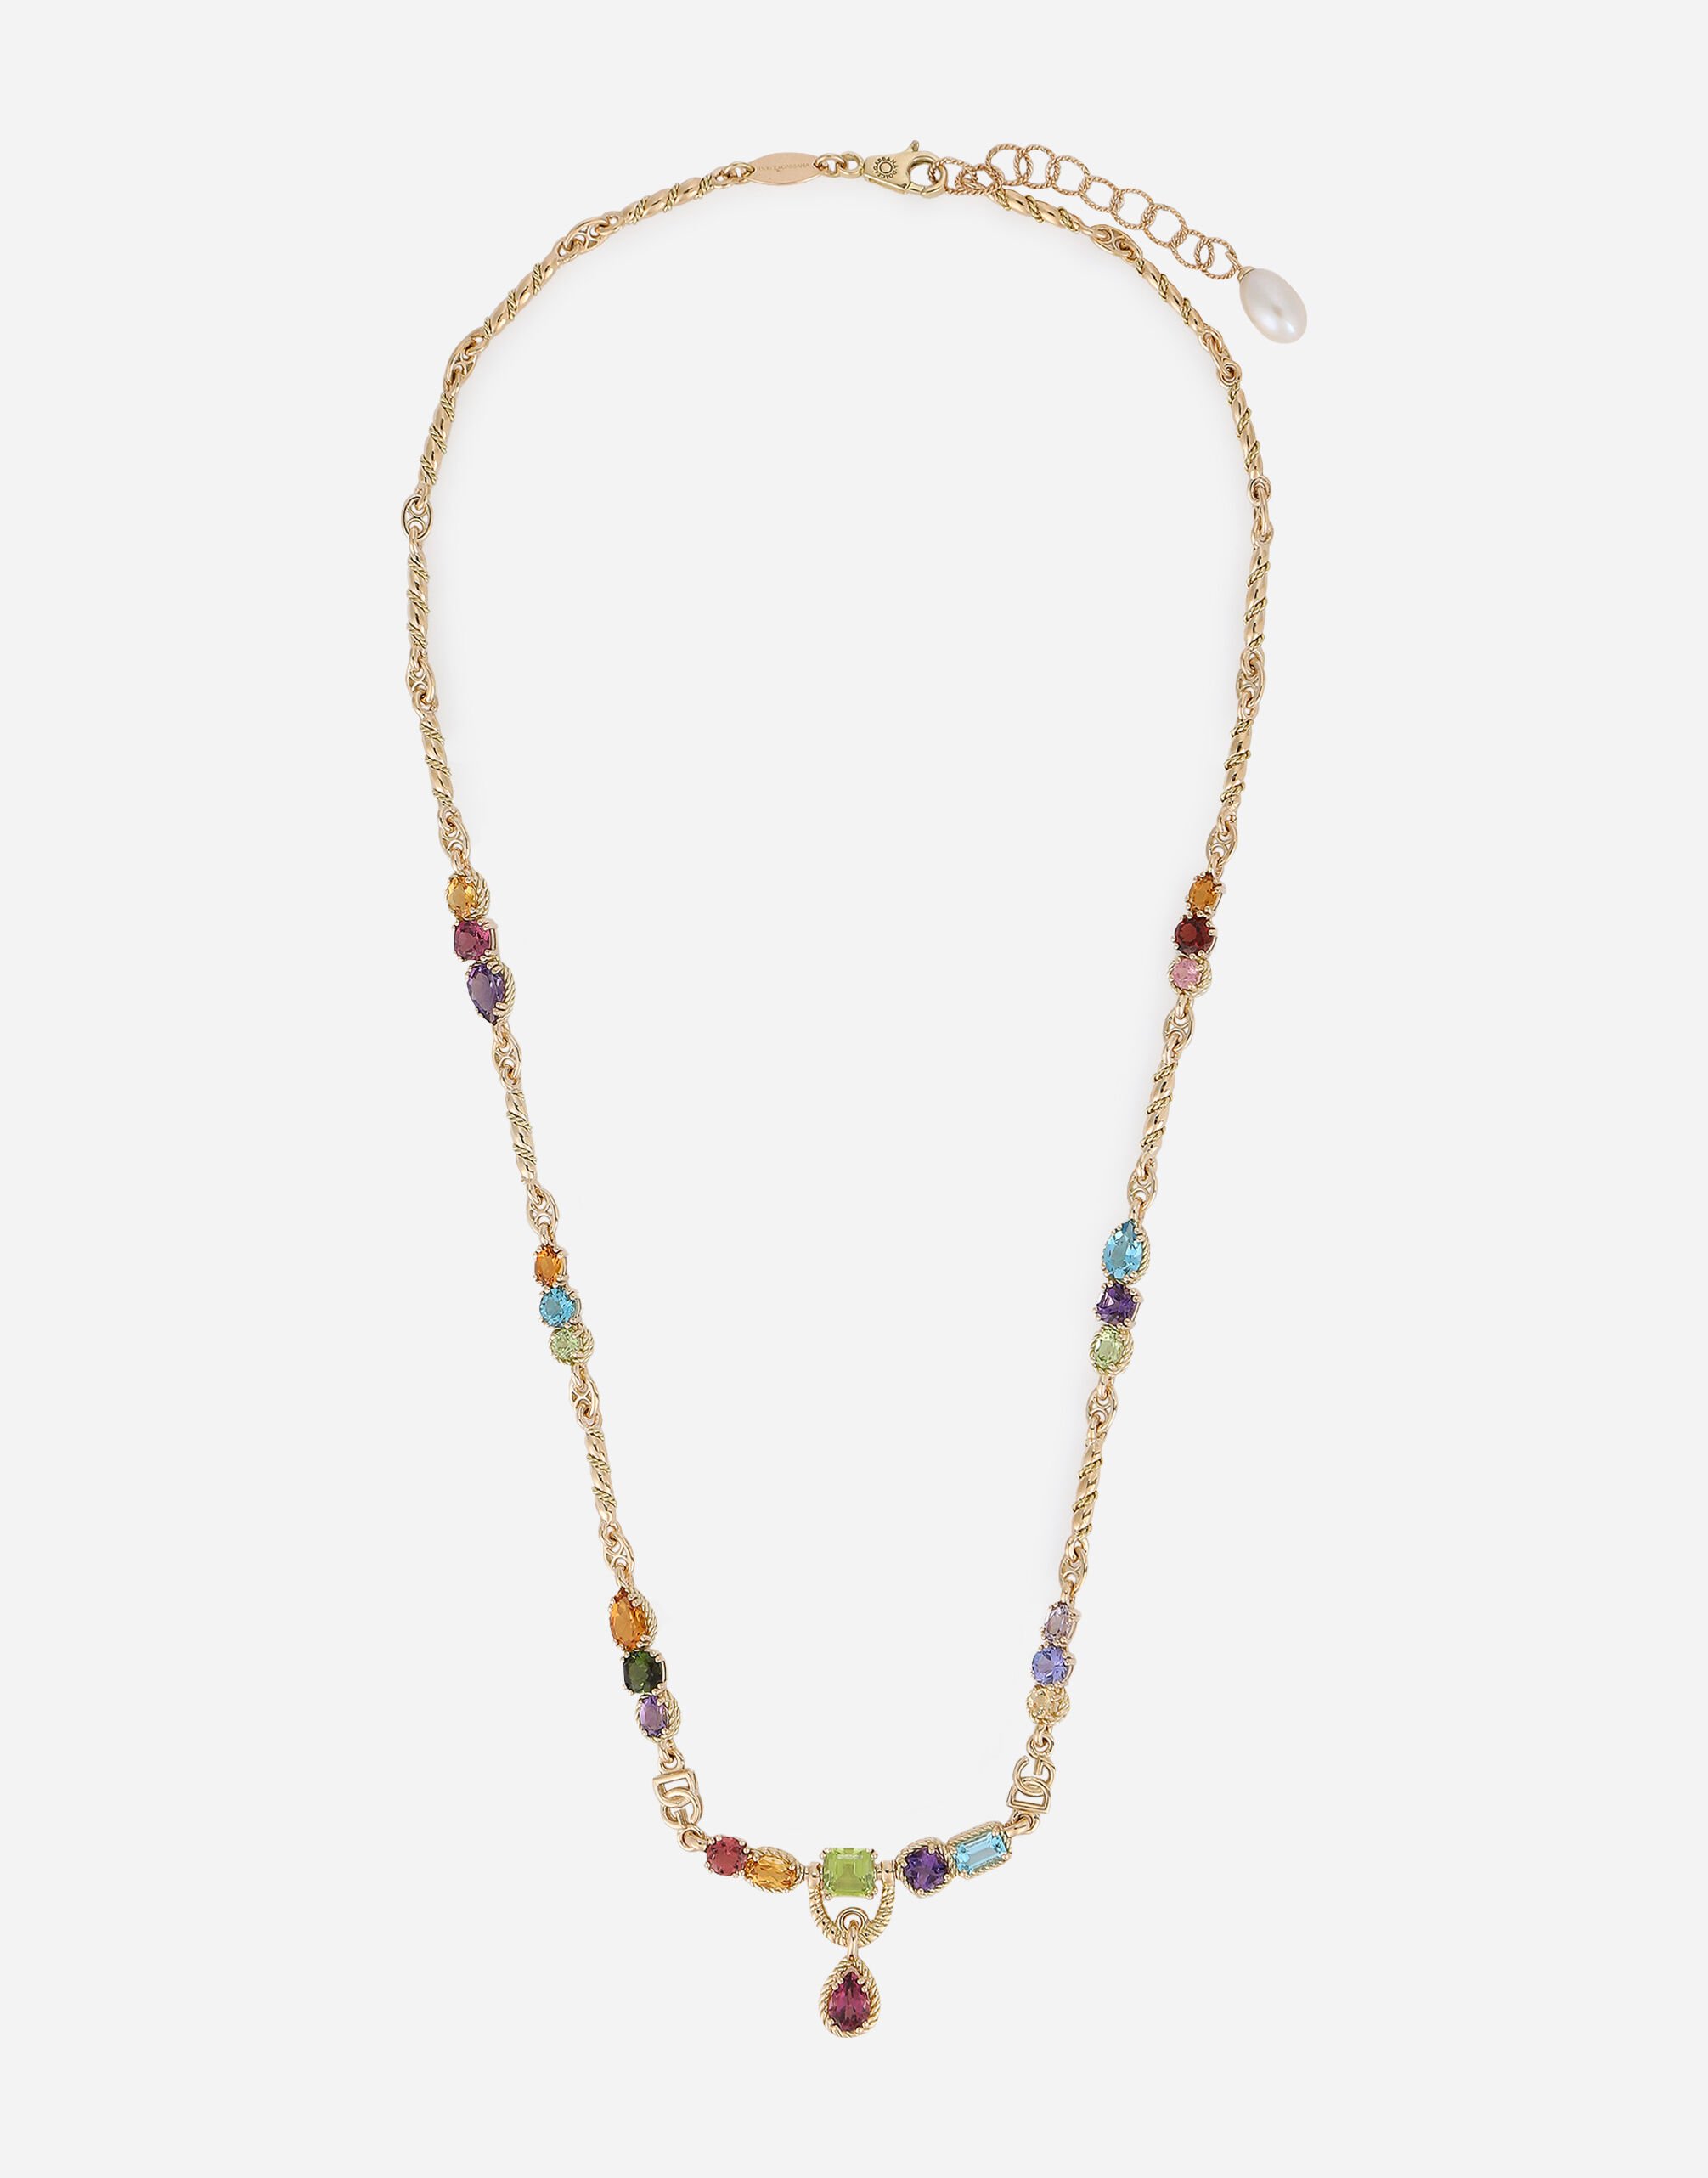 Dolce & Gabbana 18kt yellow gold necklace with multicolored fine gemstones Yellow Gold WNQR1GWMIX1